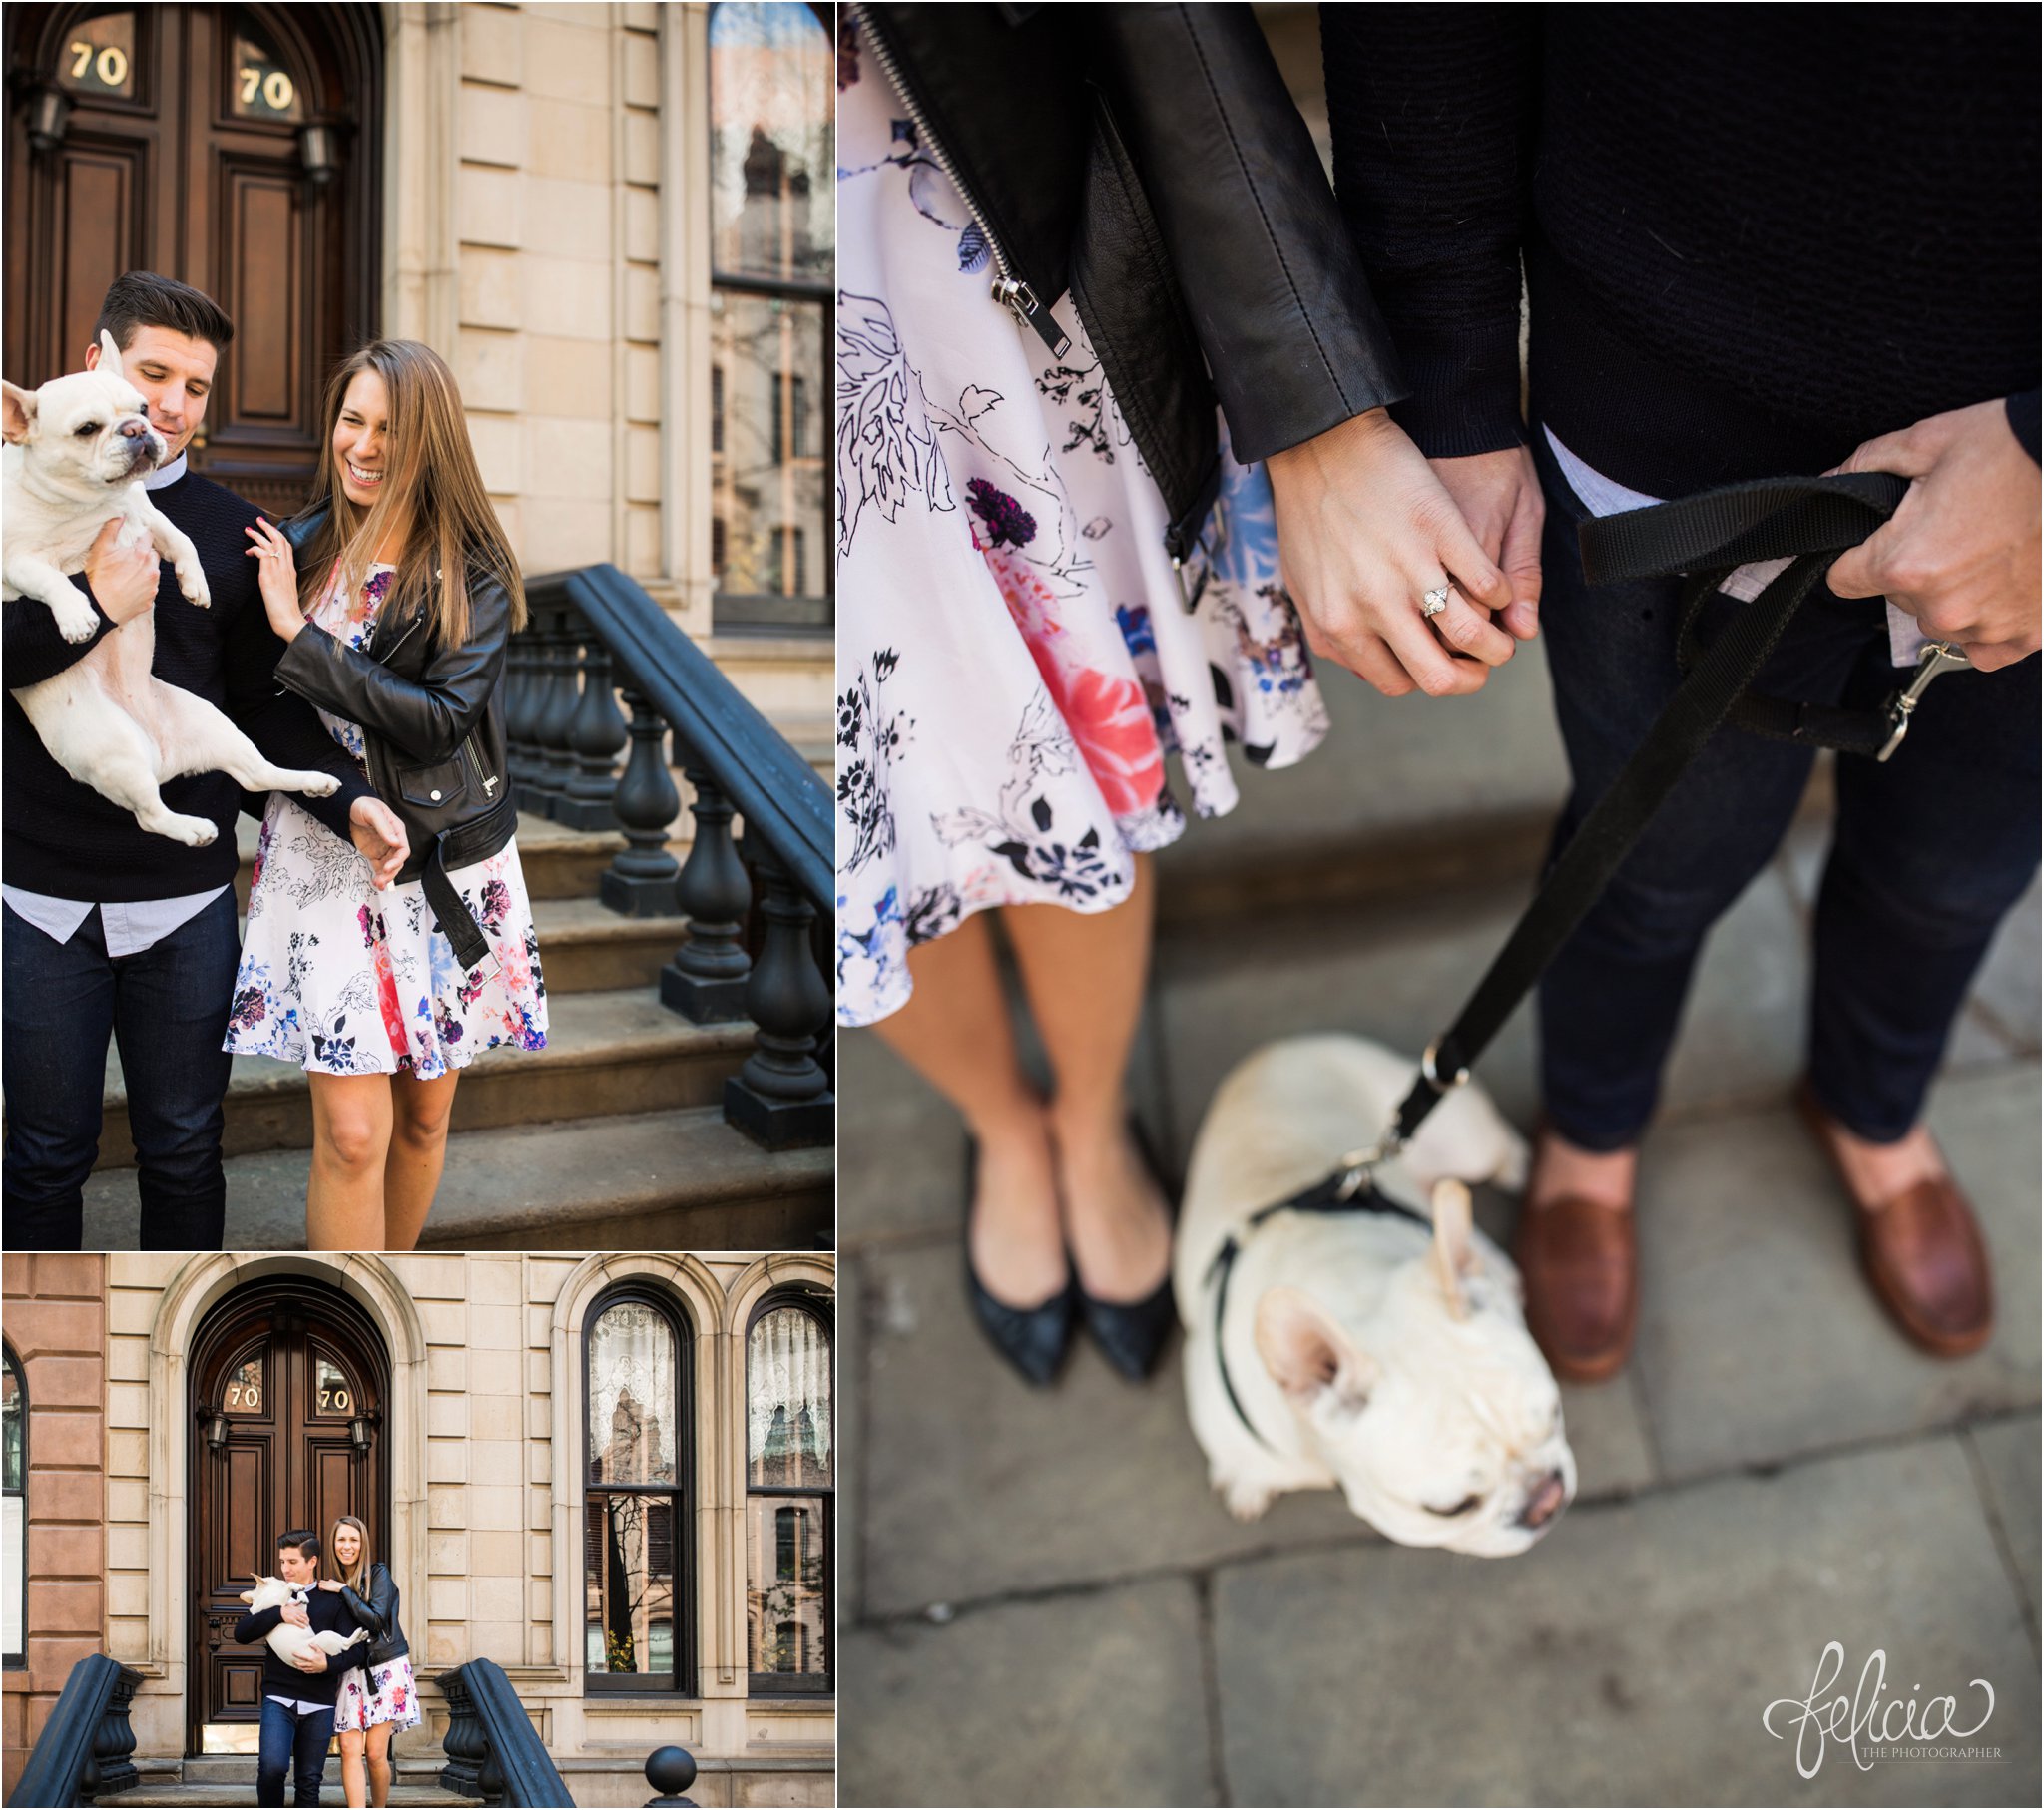 wedding | New York City | West Village | New York City photography | wedding photography | images by feliciathephotographer.com | engagement photos | engagement pictures in New York City | romantic engagement photos | smiling bride and groom | stairway | engagement photos with dog | French Bulldog | ring photography | holding hands | funny engagement photos 